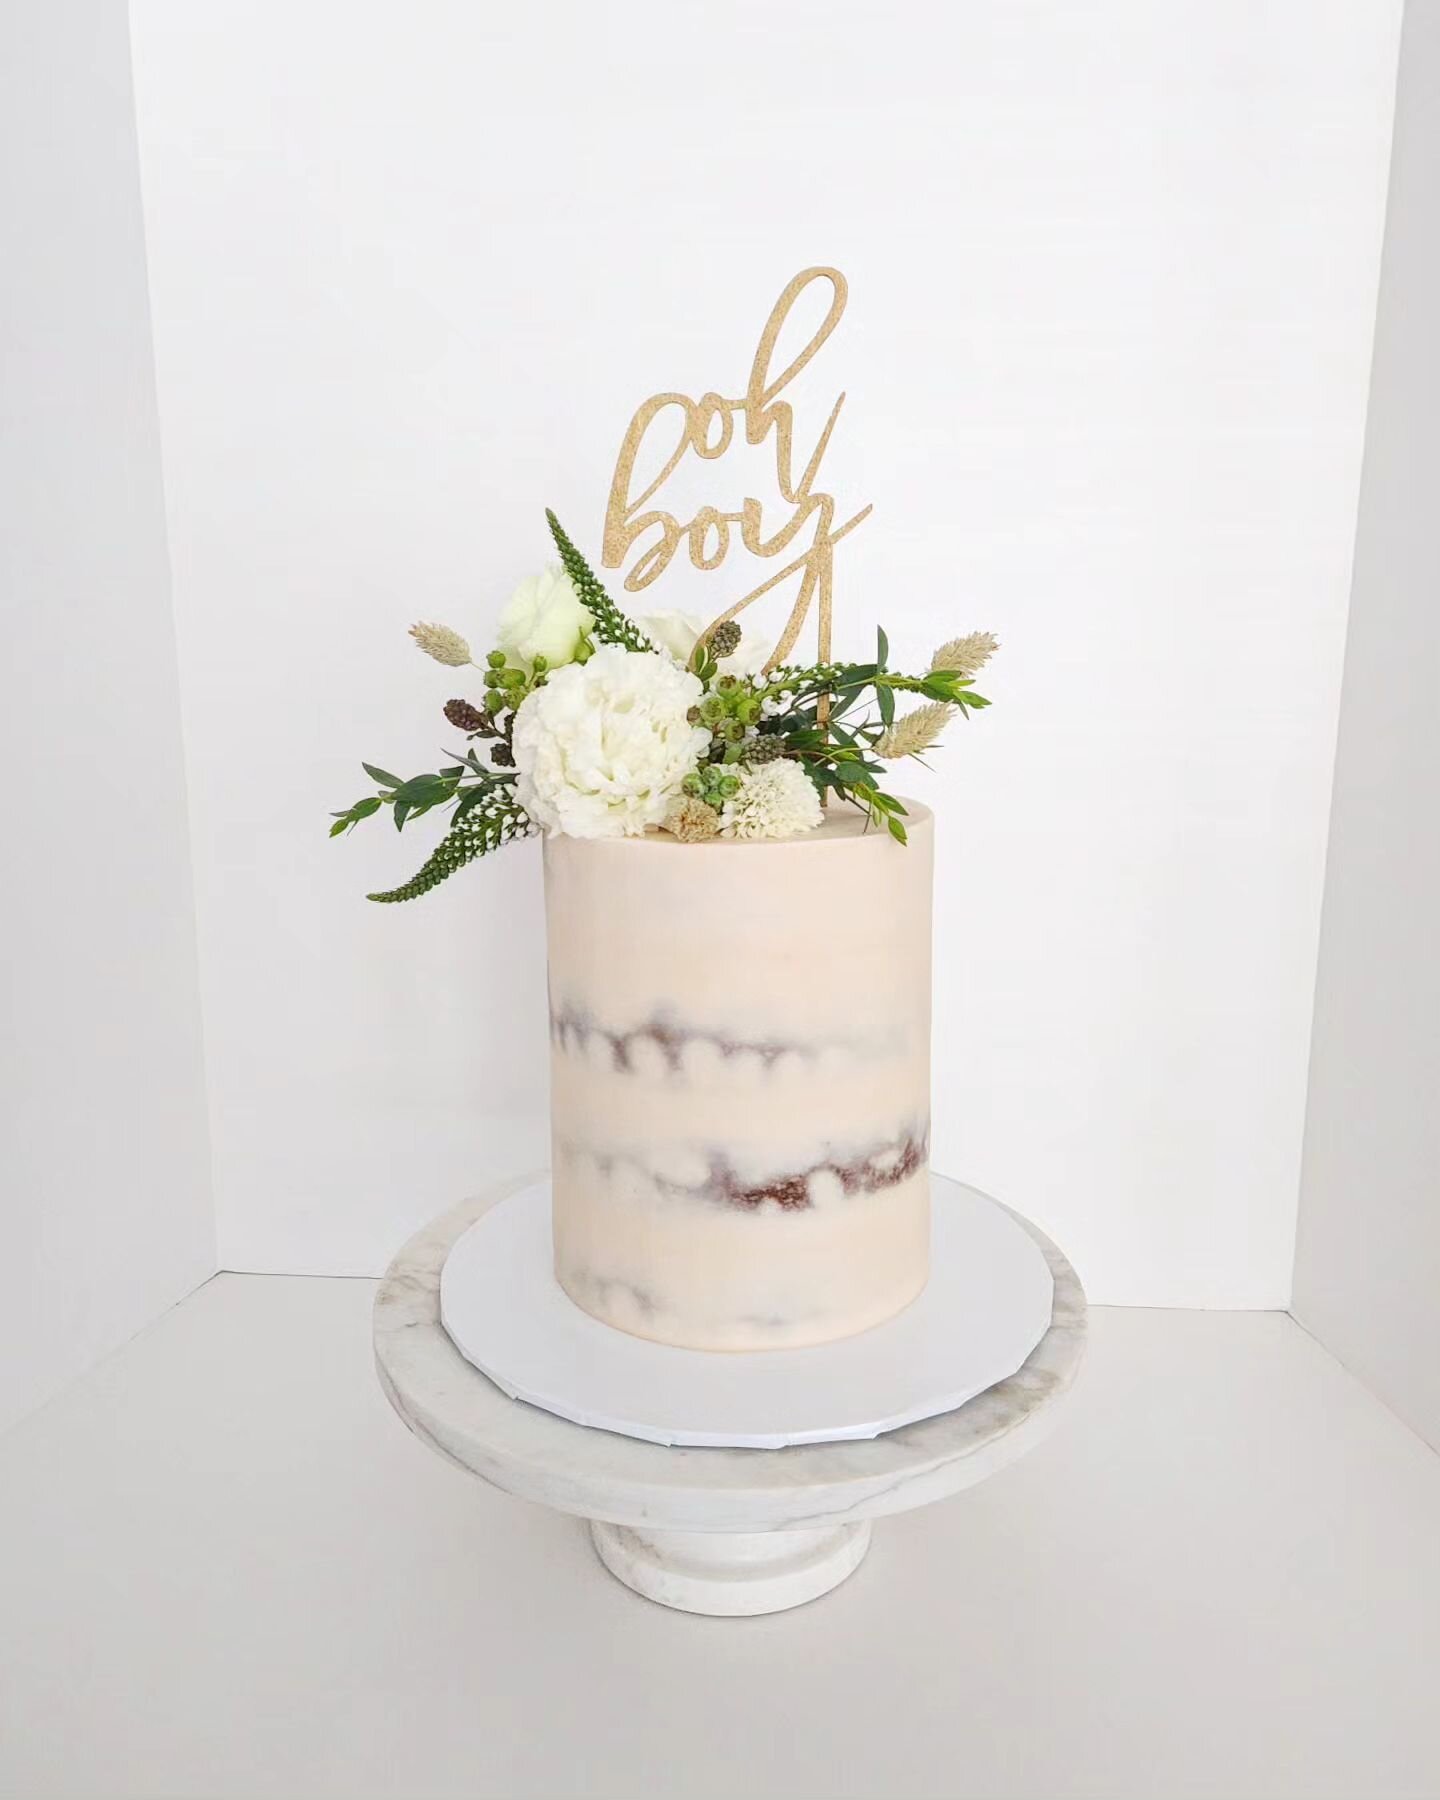 Throwback to one of our favorite summer baby shower cakes 😍
.
Blooms | @aquarela.gifts.flowers 
Cake Topper | @lavenderdotsdesign 
.
.
.
.
.
.
.
.
#finaleefloralcakes #babyshower #babyshowercake #nakedcake #floralcake #summervibes #milestones #congr